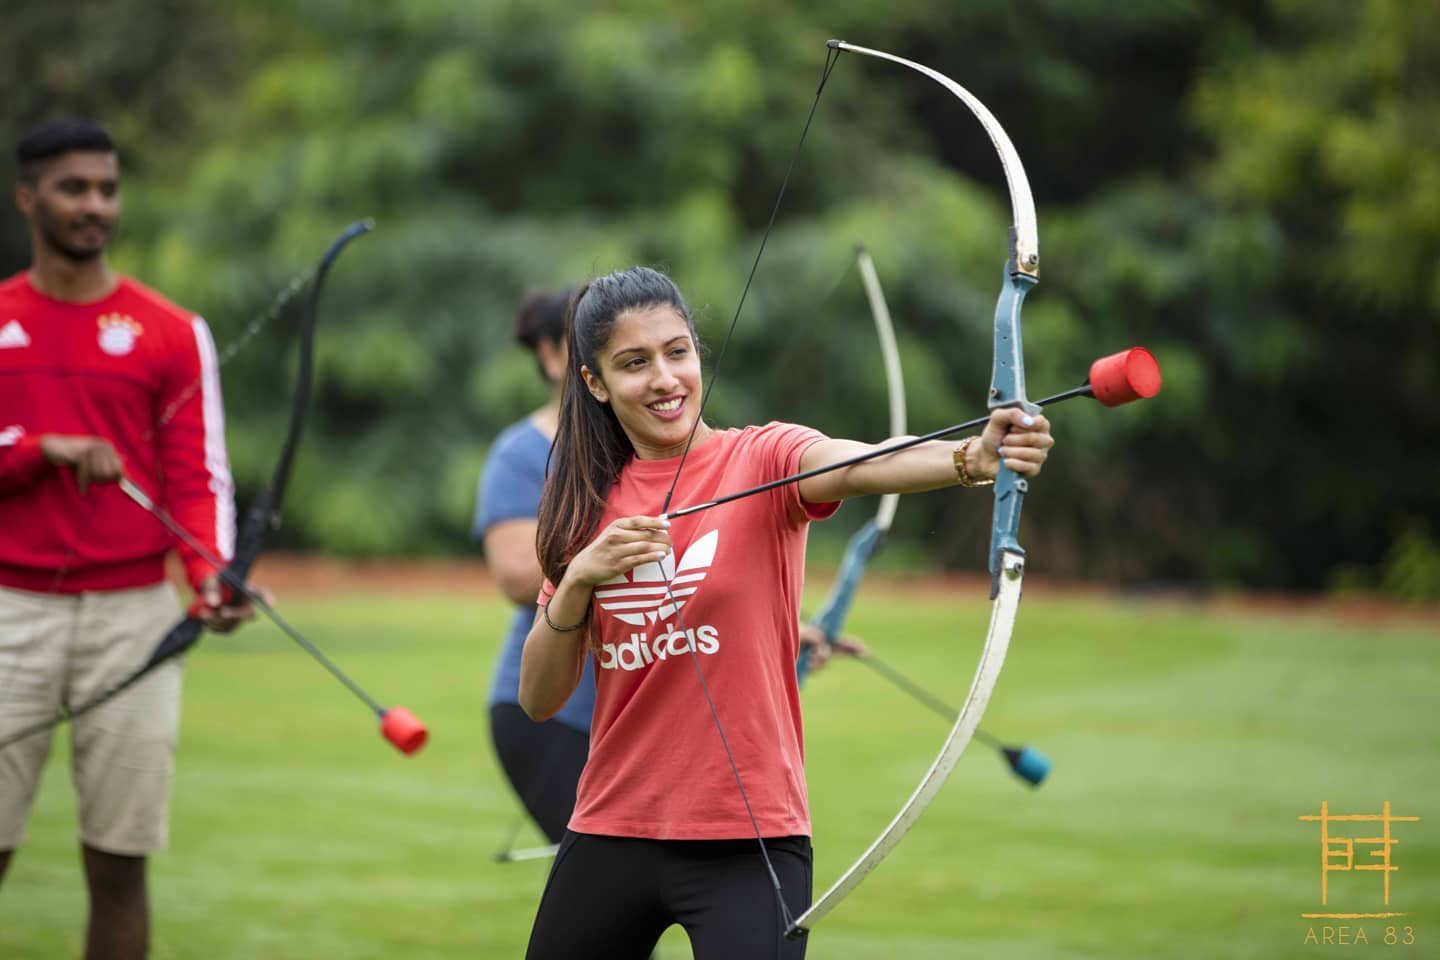 Archery Tag at Area83 | Resort with Games in Bangalore